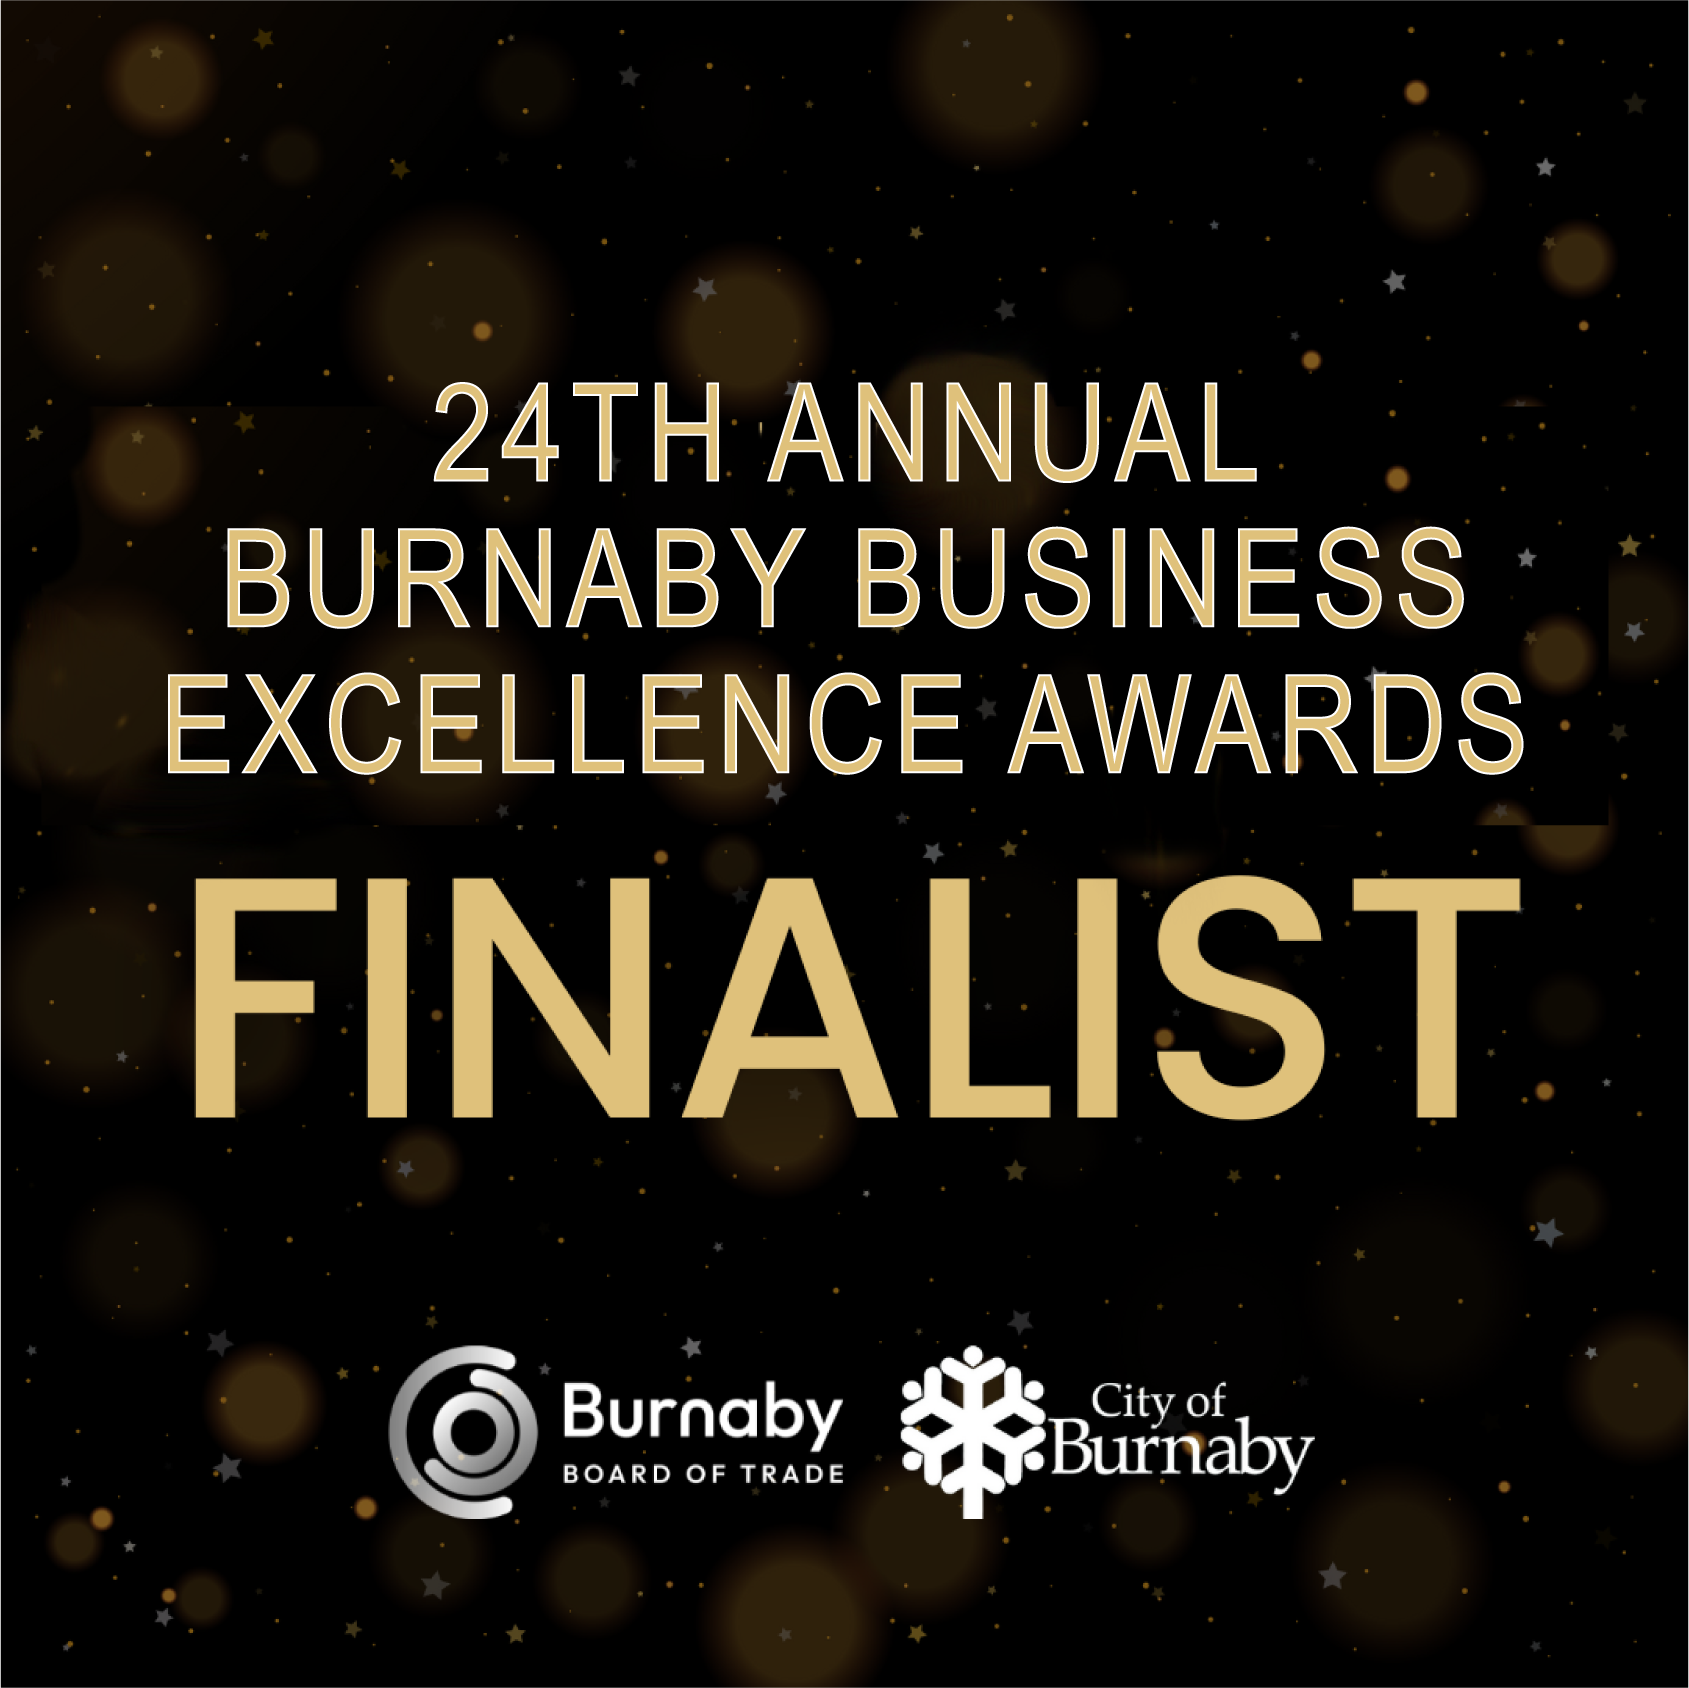 OSI Selected as Finalist in Burnaby Business Excellence Award